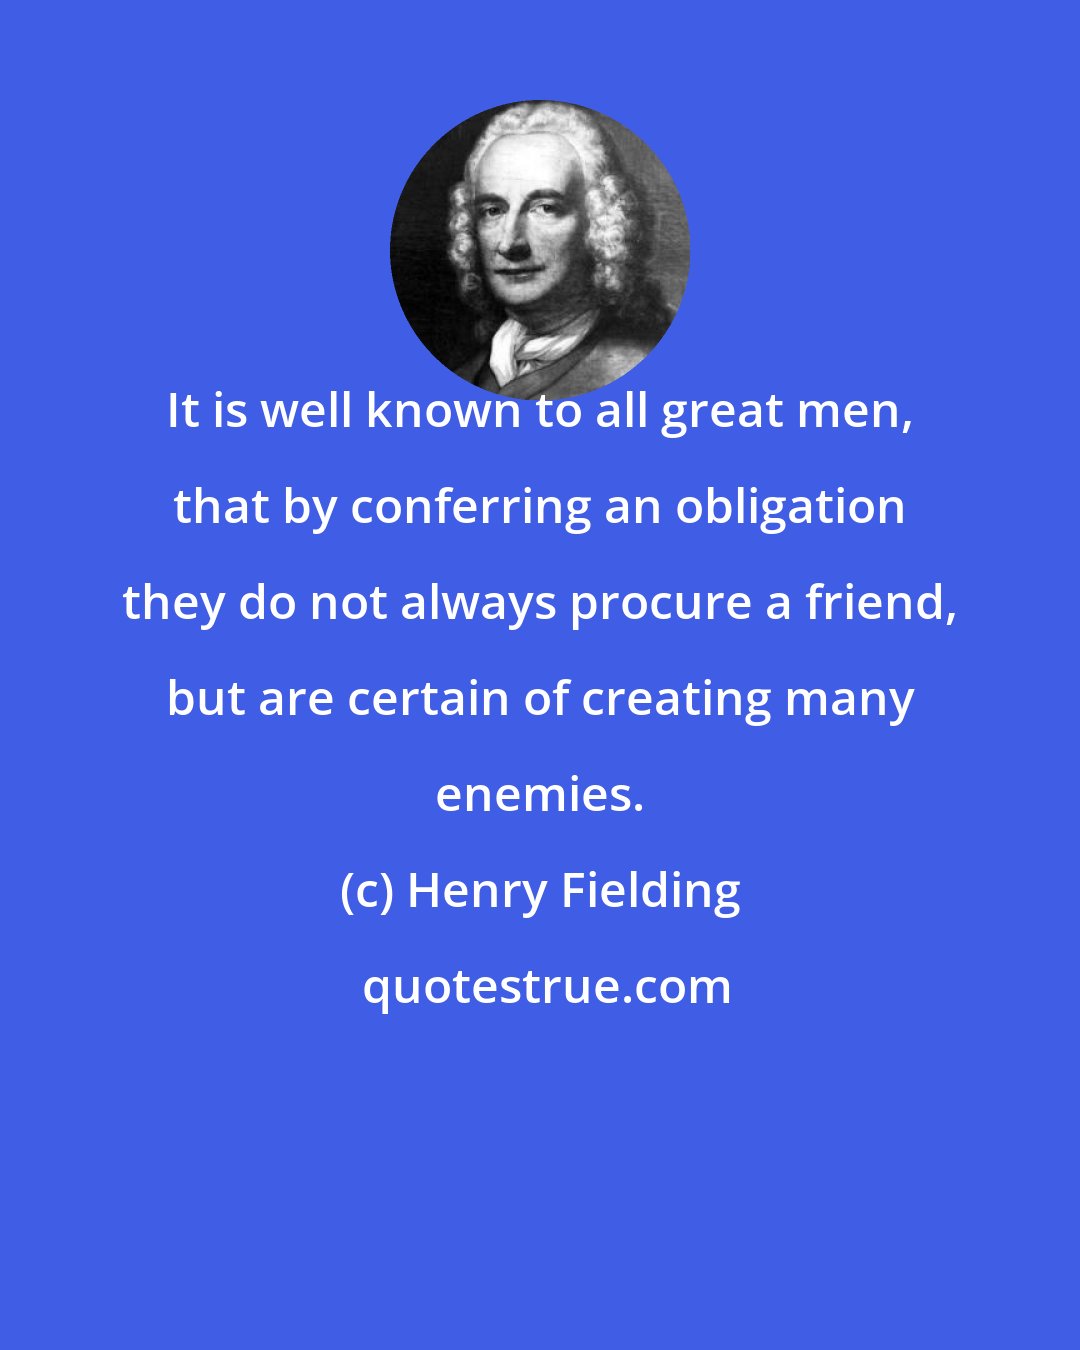 Henry Fielding: It is well known to all great men, that by conferring an obligation they do not always procure a friend, but are certain of creating many enemies.